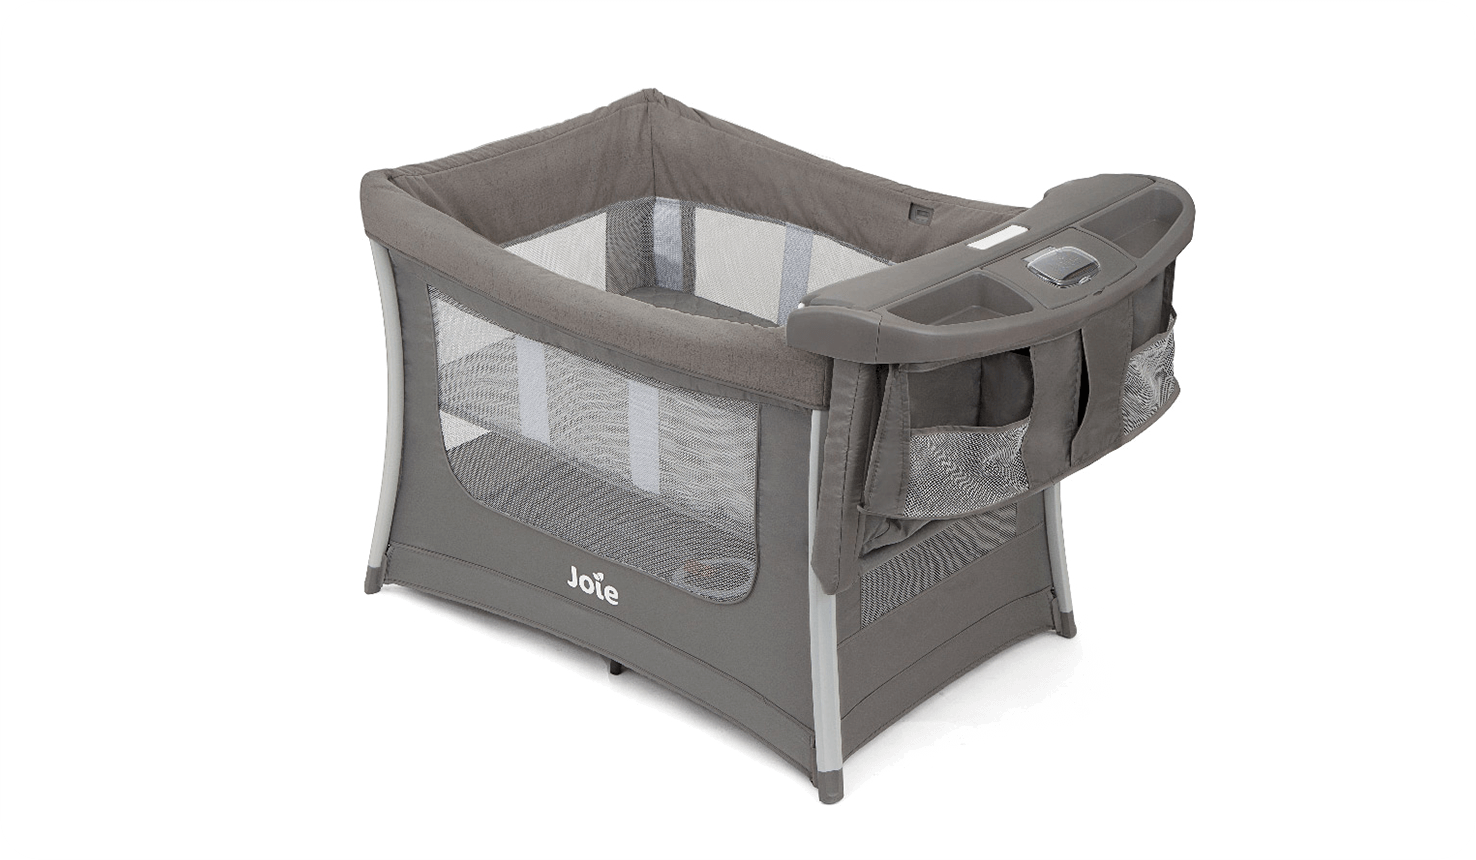 The Joie travel cot illusion with bassinet insert and changing table storage on top in dark gray from a left angle.